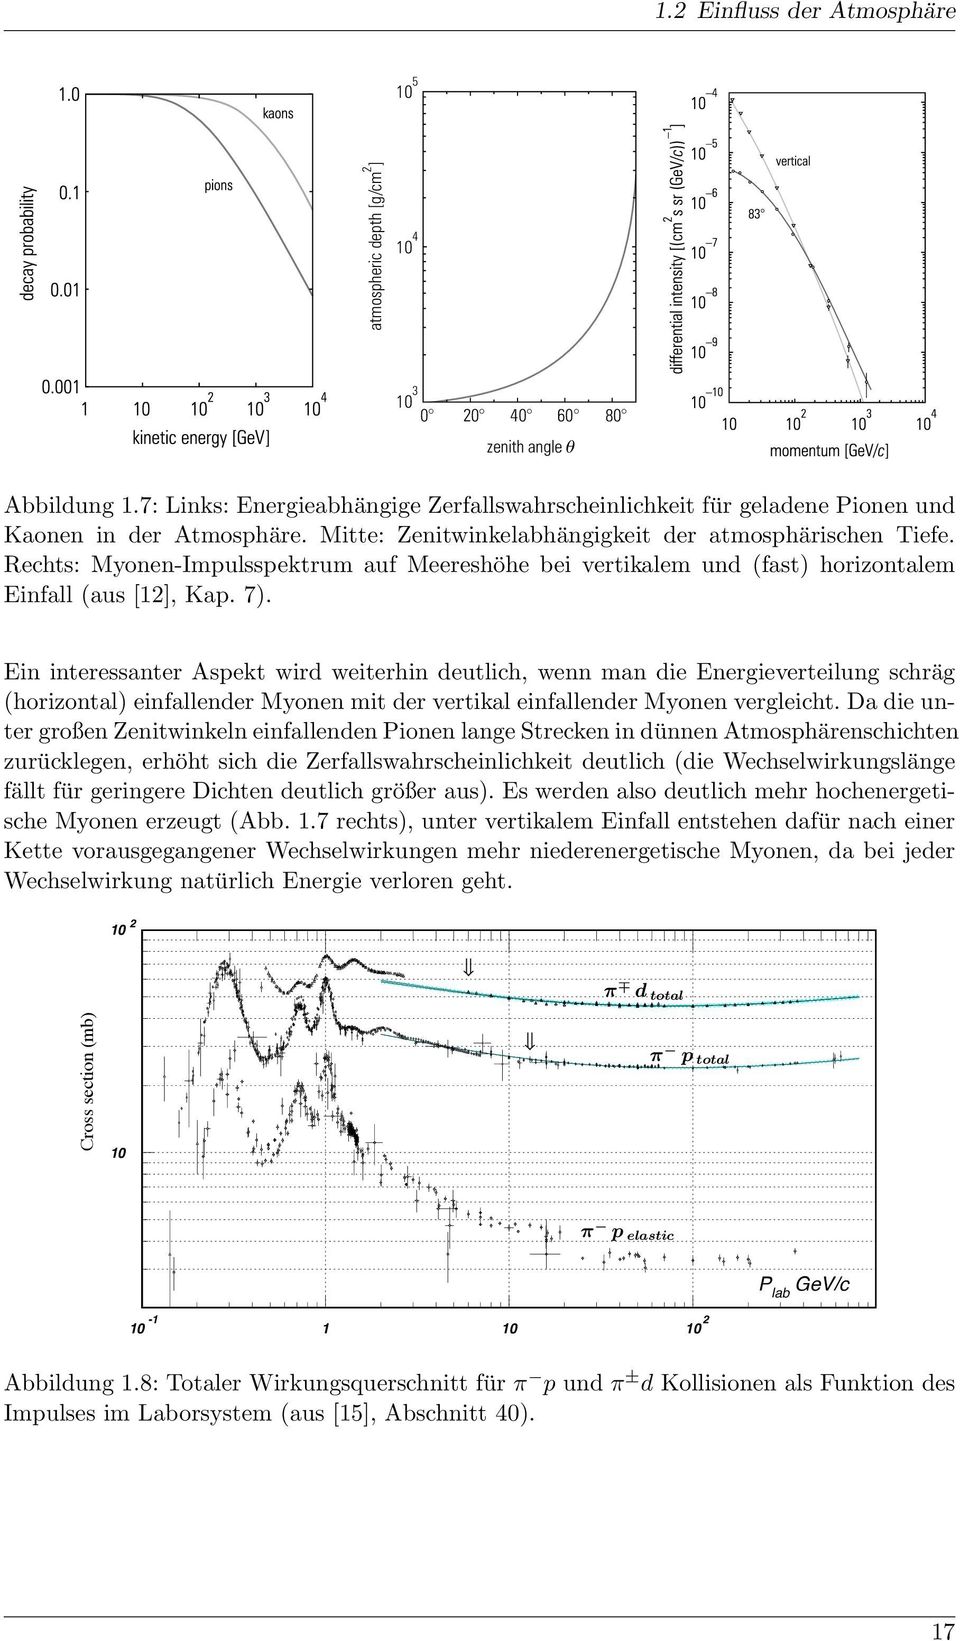 inmomentum the spect spectrum for inclined di Fig. 7.6 atmosphere. The lateral size1.2 toofmomenta Einfluss an electromagnetic der of approximately Atmosphäre cascade 20 TeV/c (Fig.